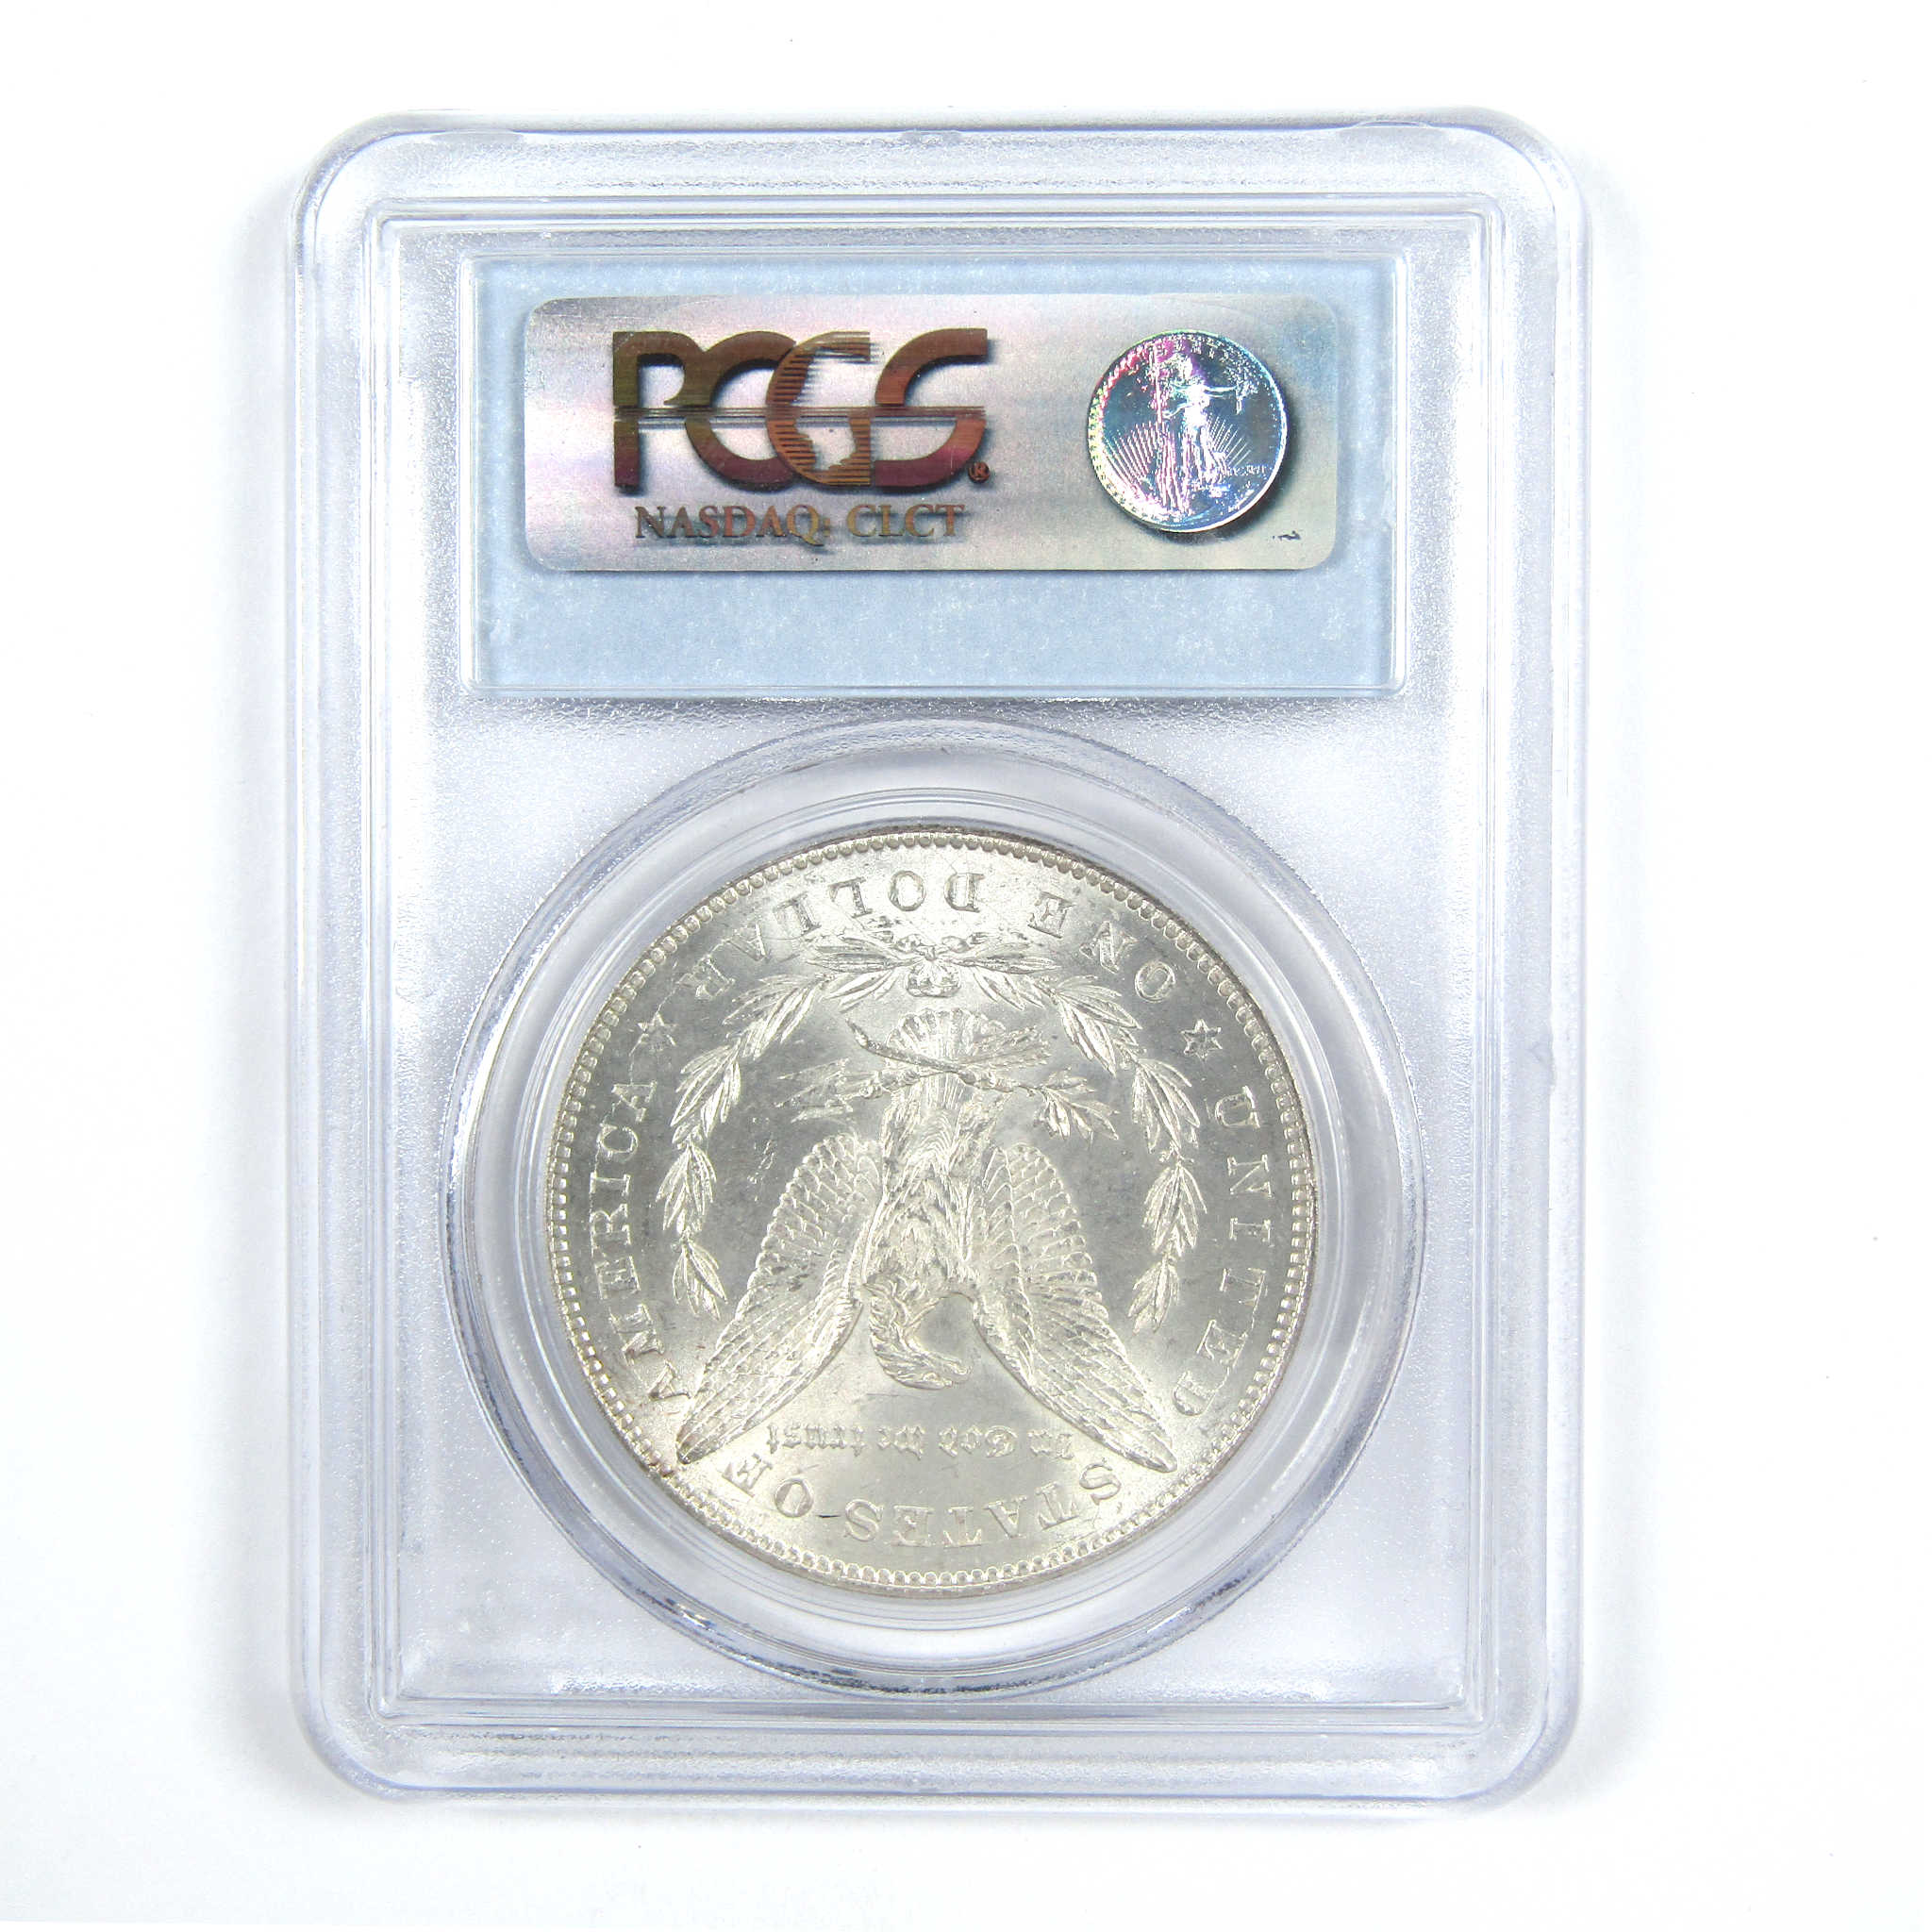 1878 7TF Rev 78 VAM-84 Line Under 8 Morgan $1 MS 62 PCGS SKU:CPC7335 - Morgan coin - Morgan silver dollar - Morgan silver dollar for sale - Profile Coins &amp; Collectibles